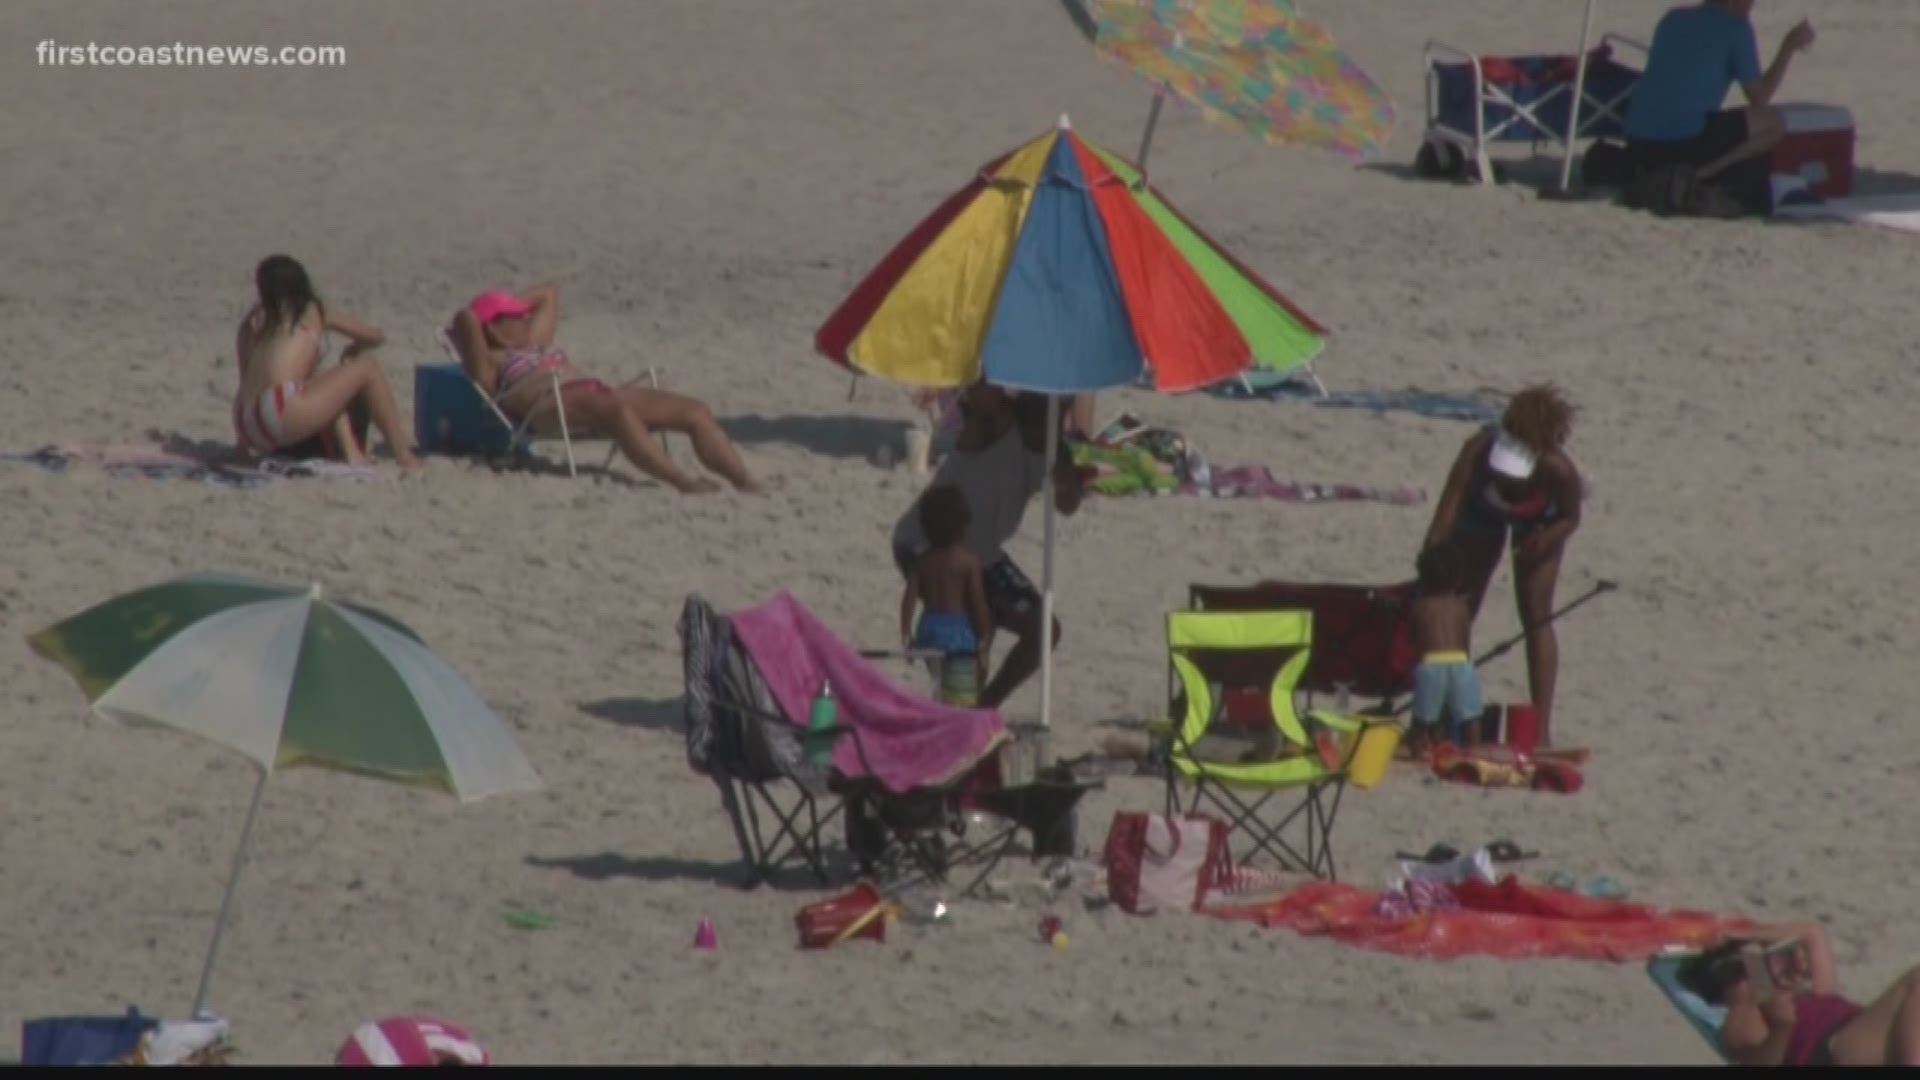 The National Oceanic and Atmospheric Administration said Thursday that last month was the hottest May in Florida in more than a century. The Palm Beach Post reports that last month's average temperature of 78.8 degrees Fahrenheit was 3.7 degrees hotter than normal.